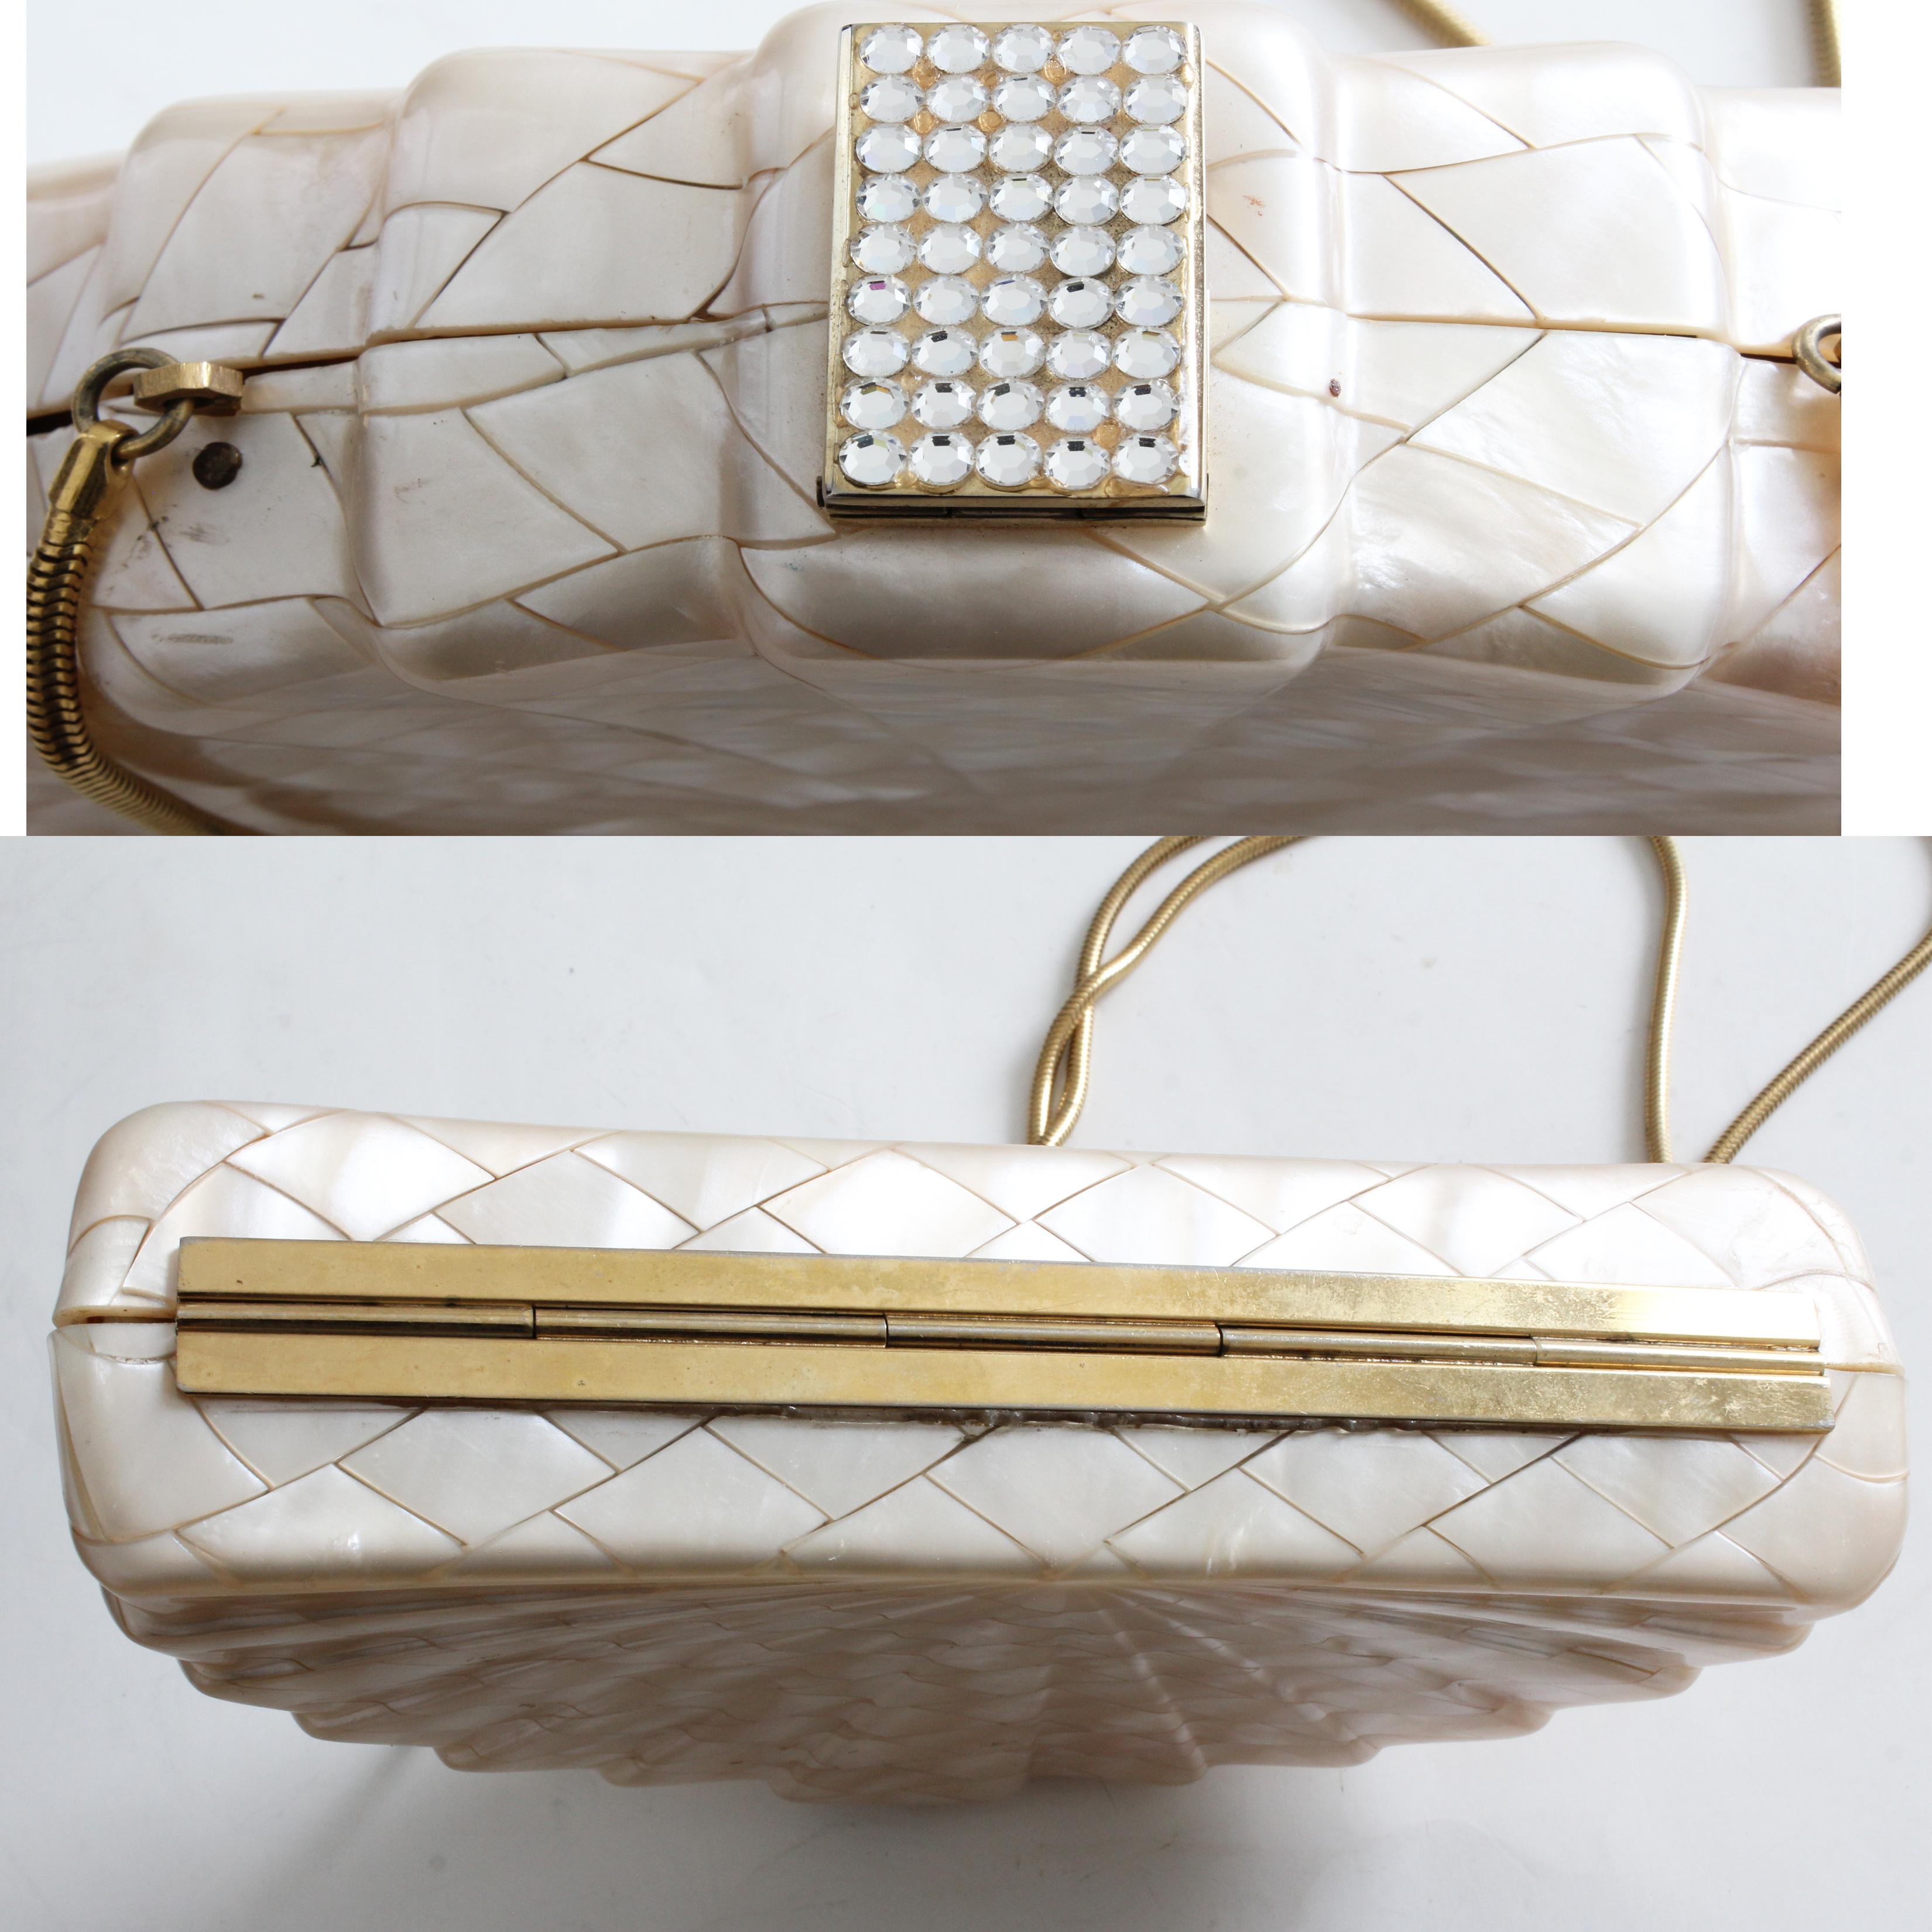 Women's Rare Saks Fifth Avenue Mosaic Clutch Evening Bag with Rhinestone Accents  1960s For Sale